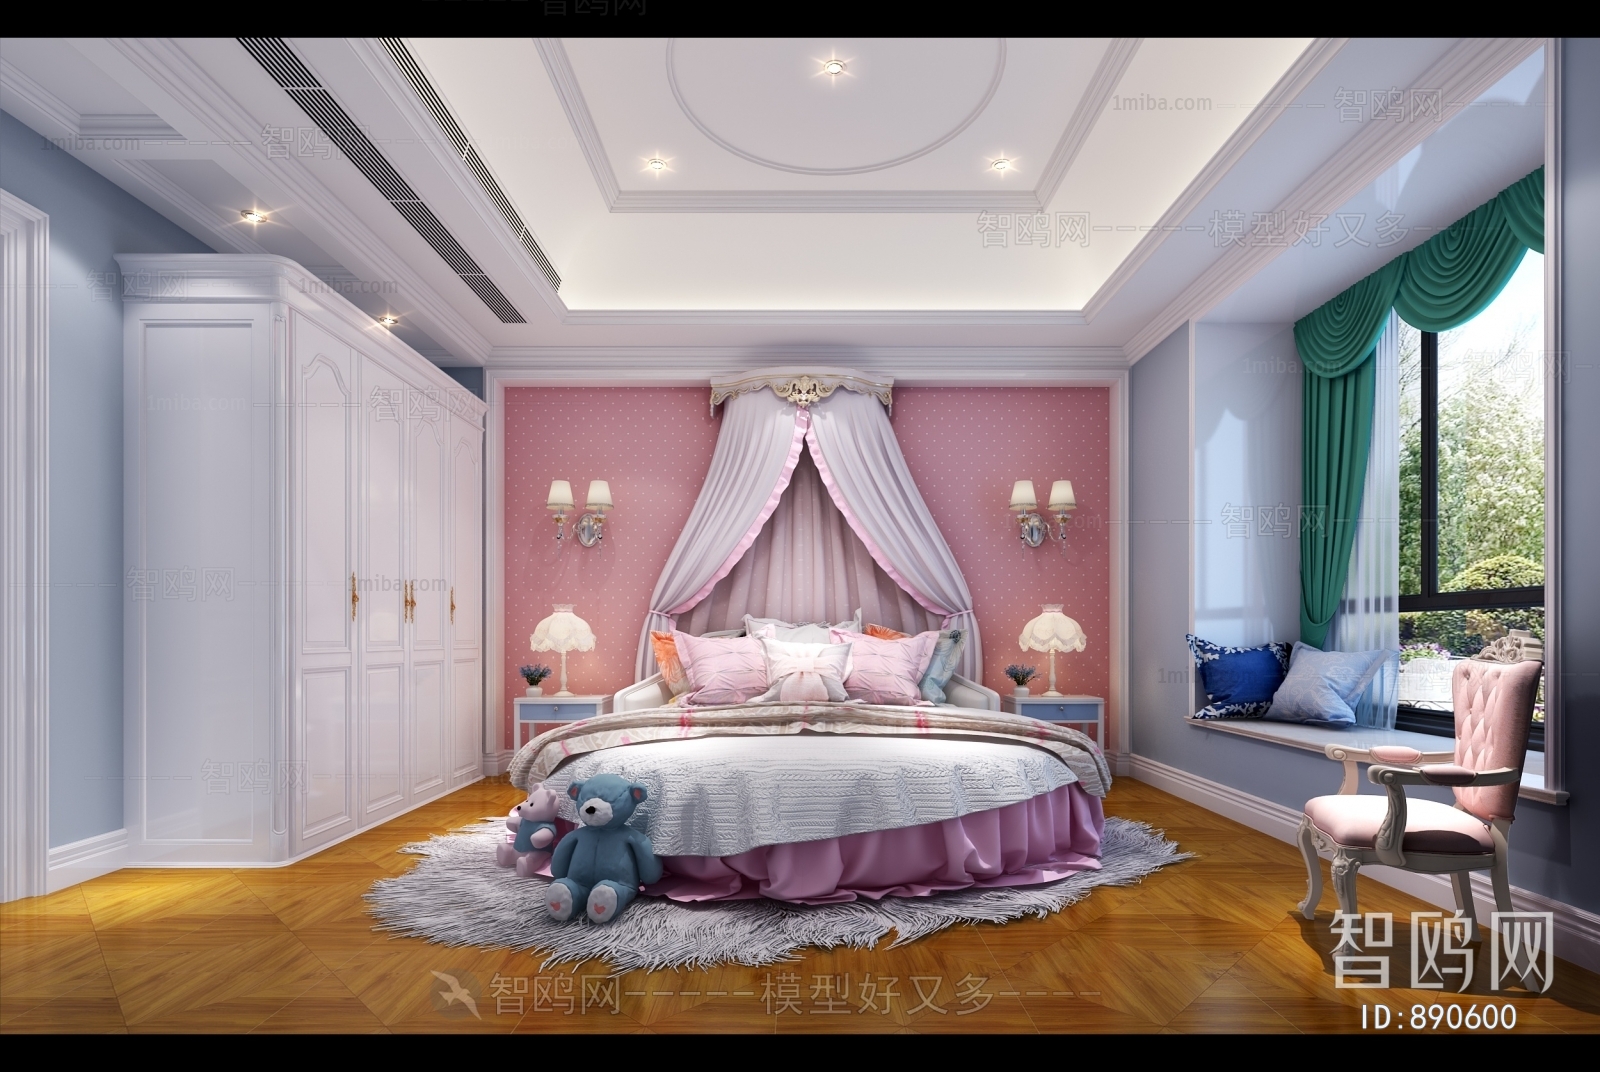 New Classical Style Girl's Room Daughter's Room